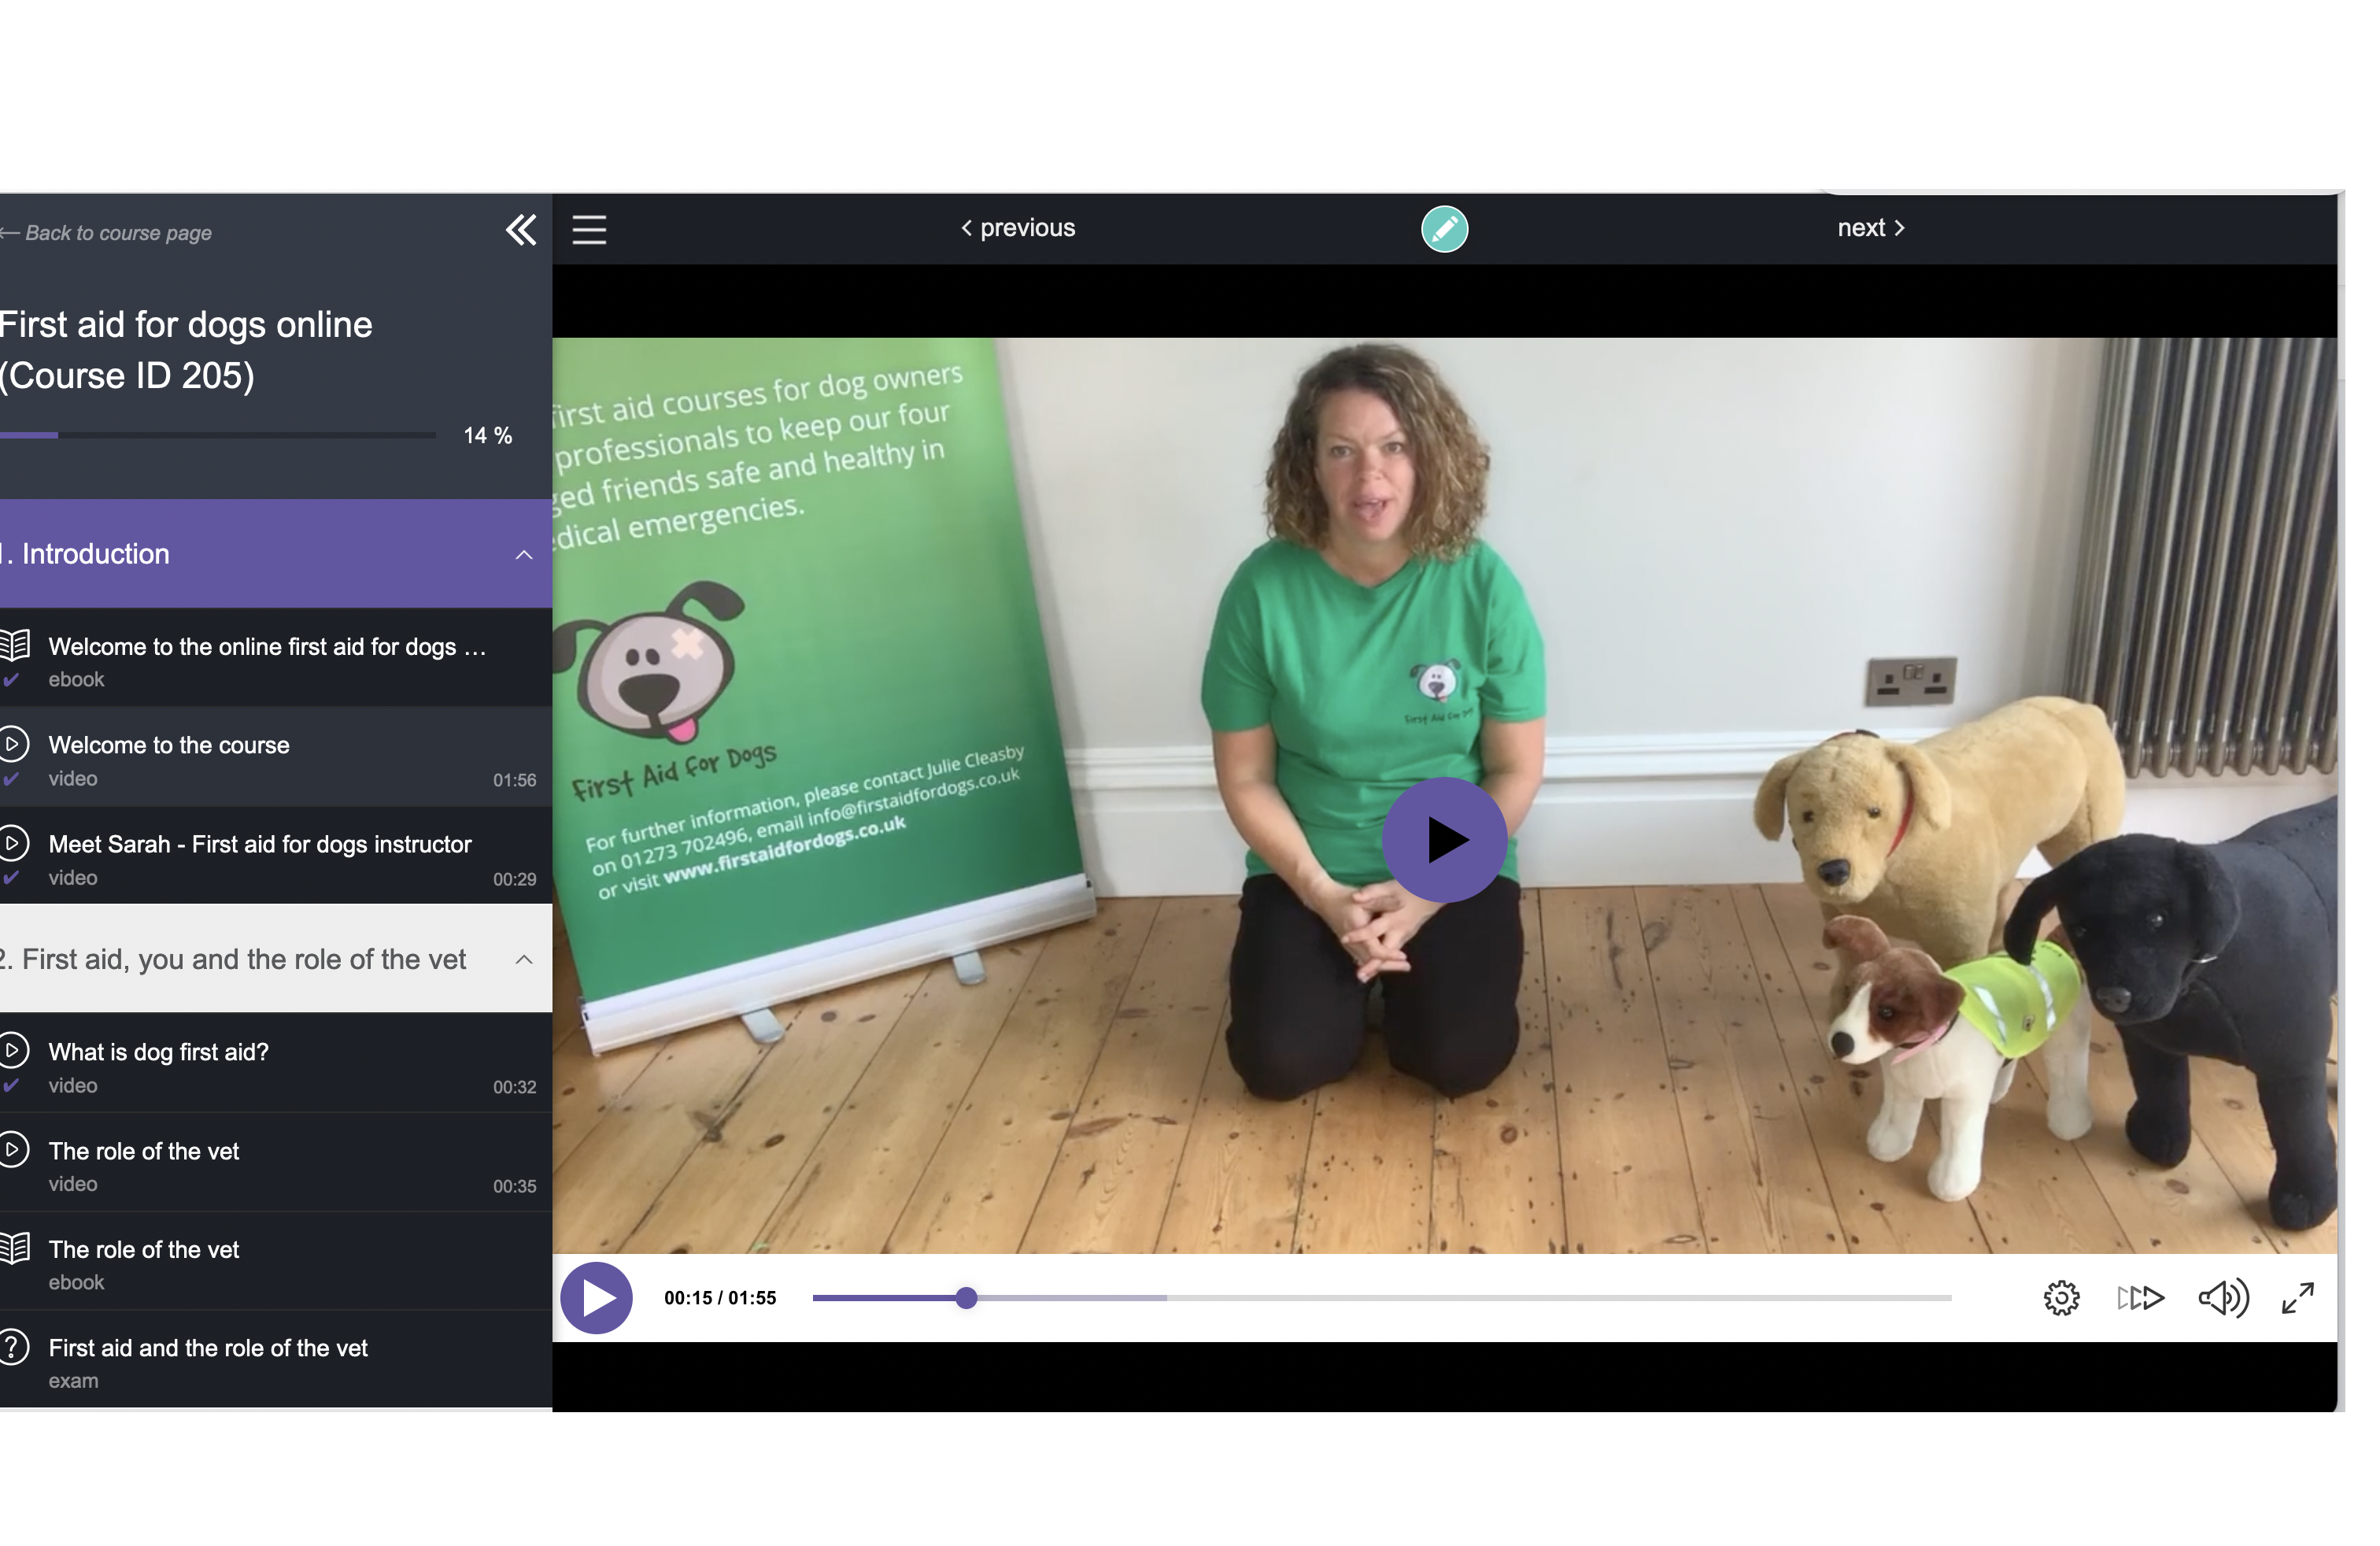 First Aid for Dogs - Pet first aid courses in brighton, worthing, crawley,  sussex, surrey, kent, ruislip, middlesex and london